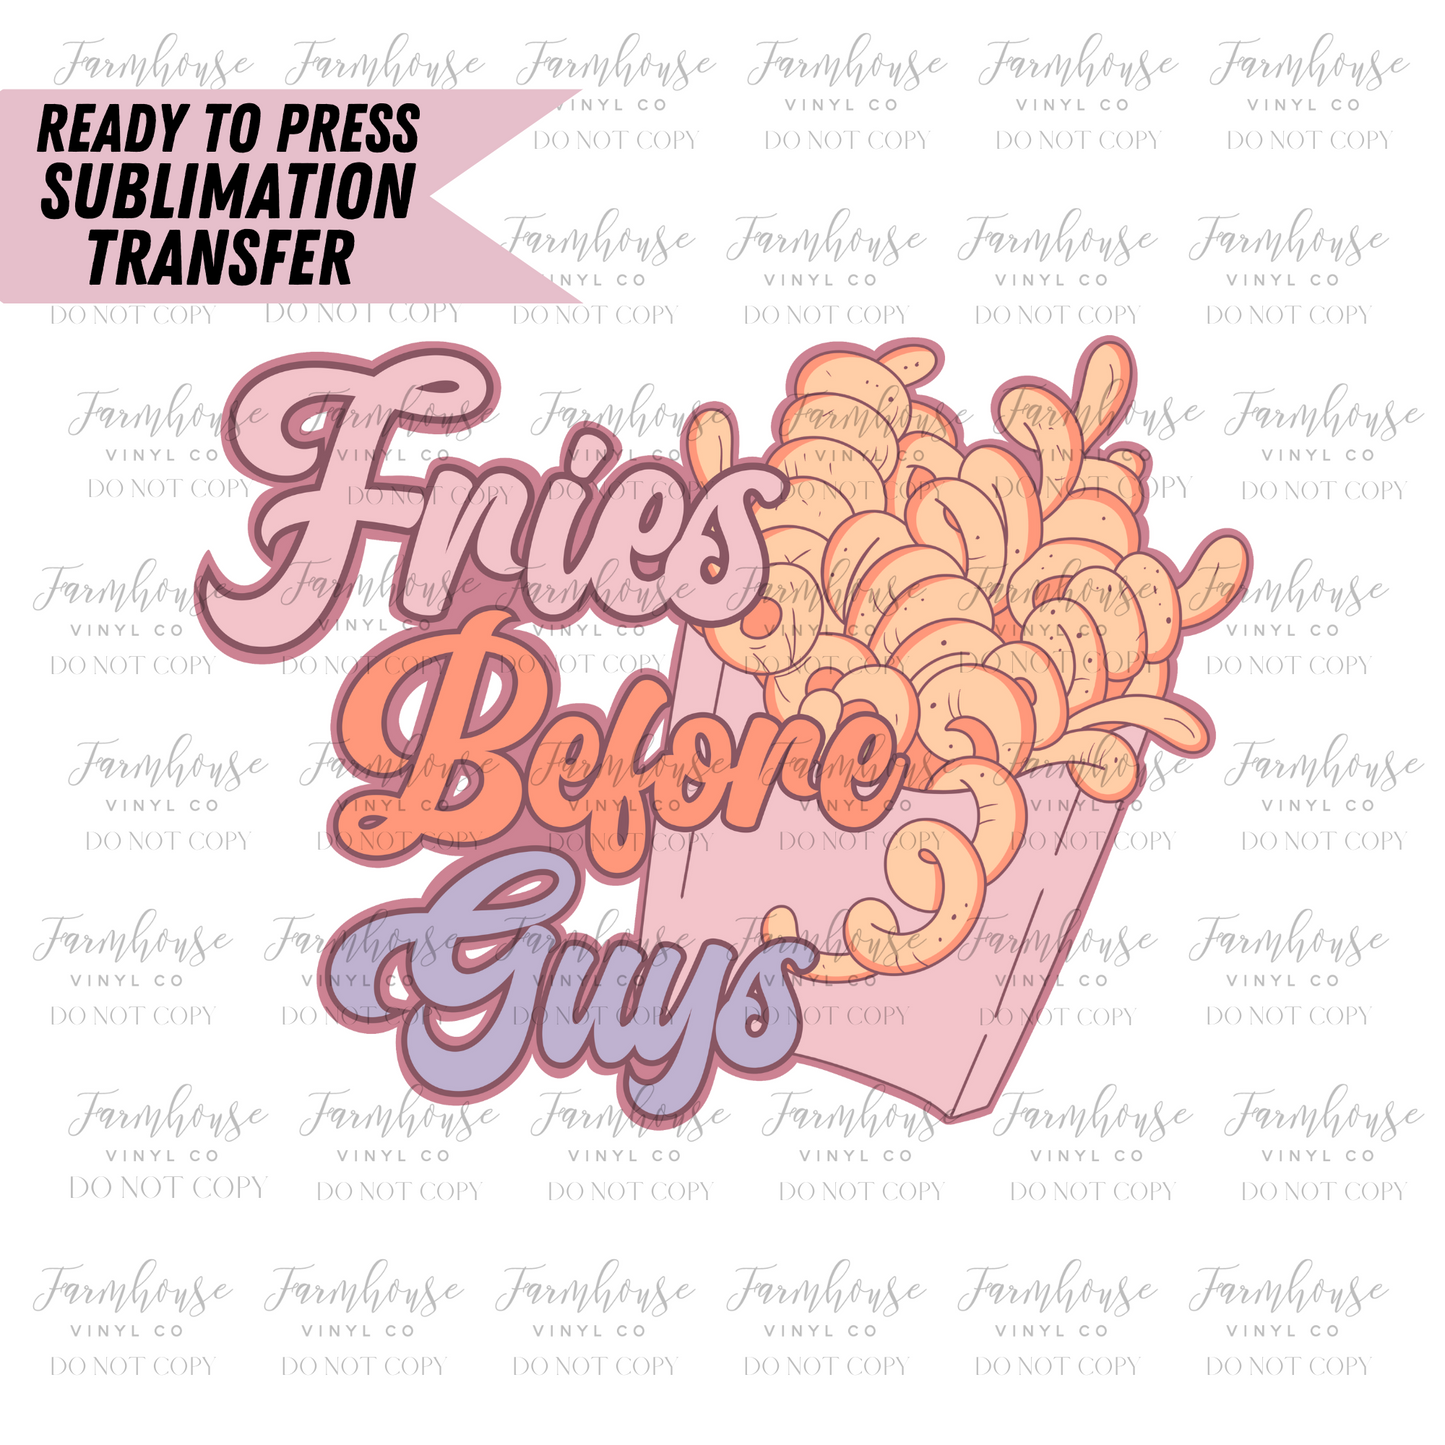 Fries Before Guys Ready To Press Sublimation Transfer